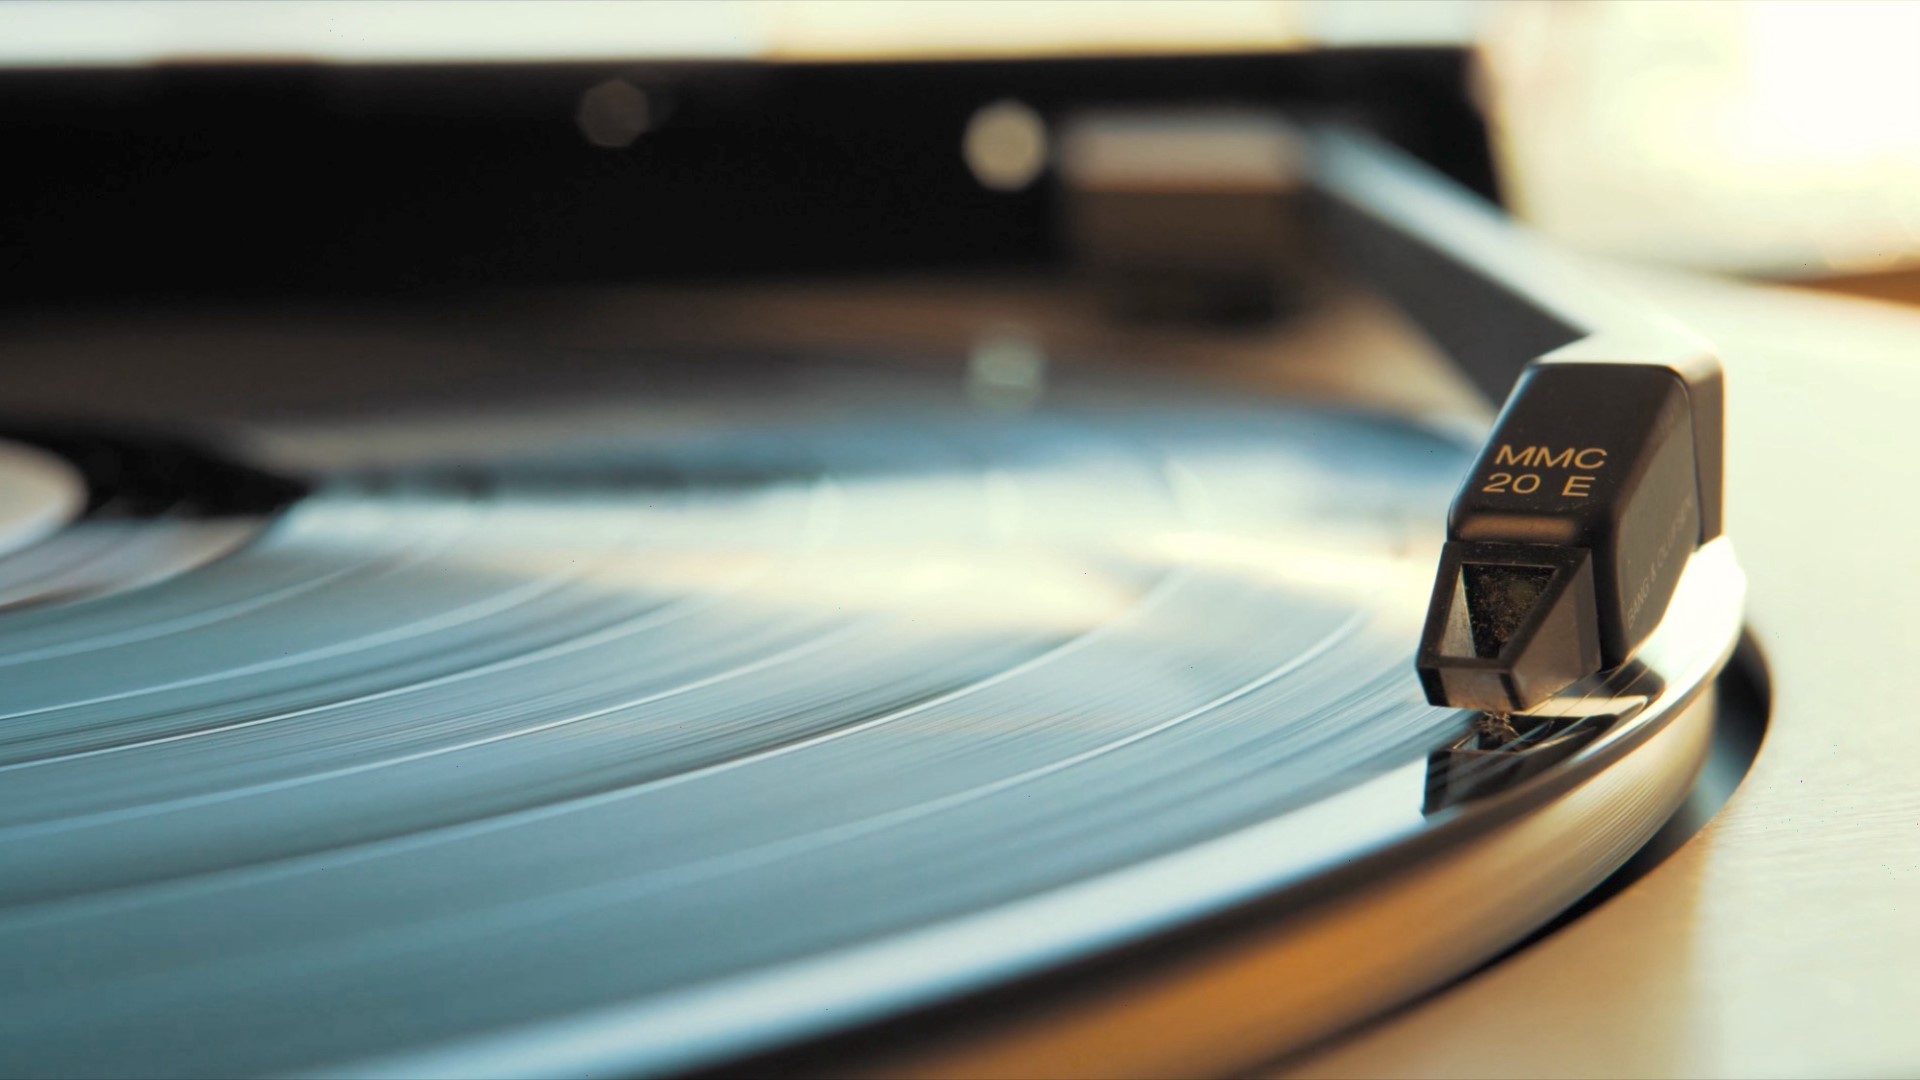 Here's how to tell if your old vinyl records are with any money. Veuer's Johana Restrepo has more.